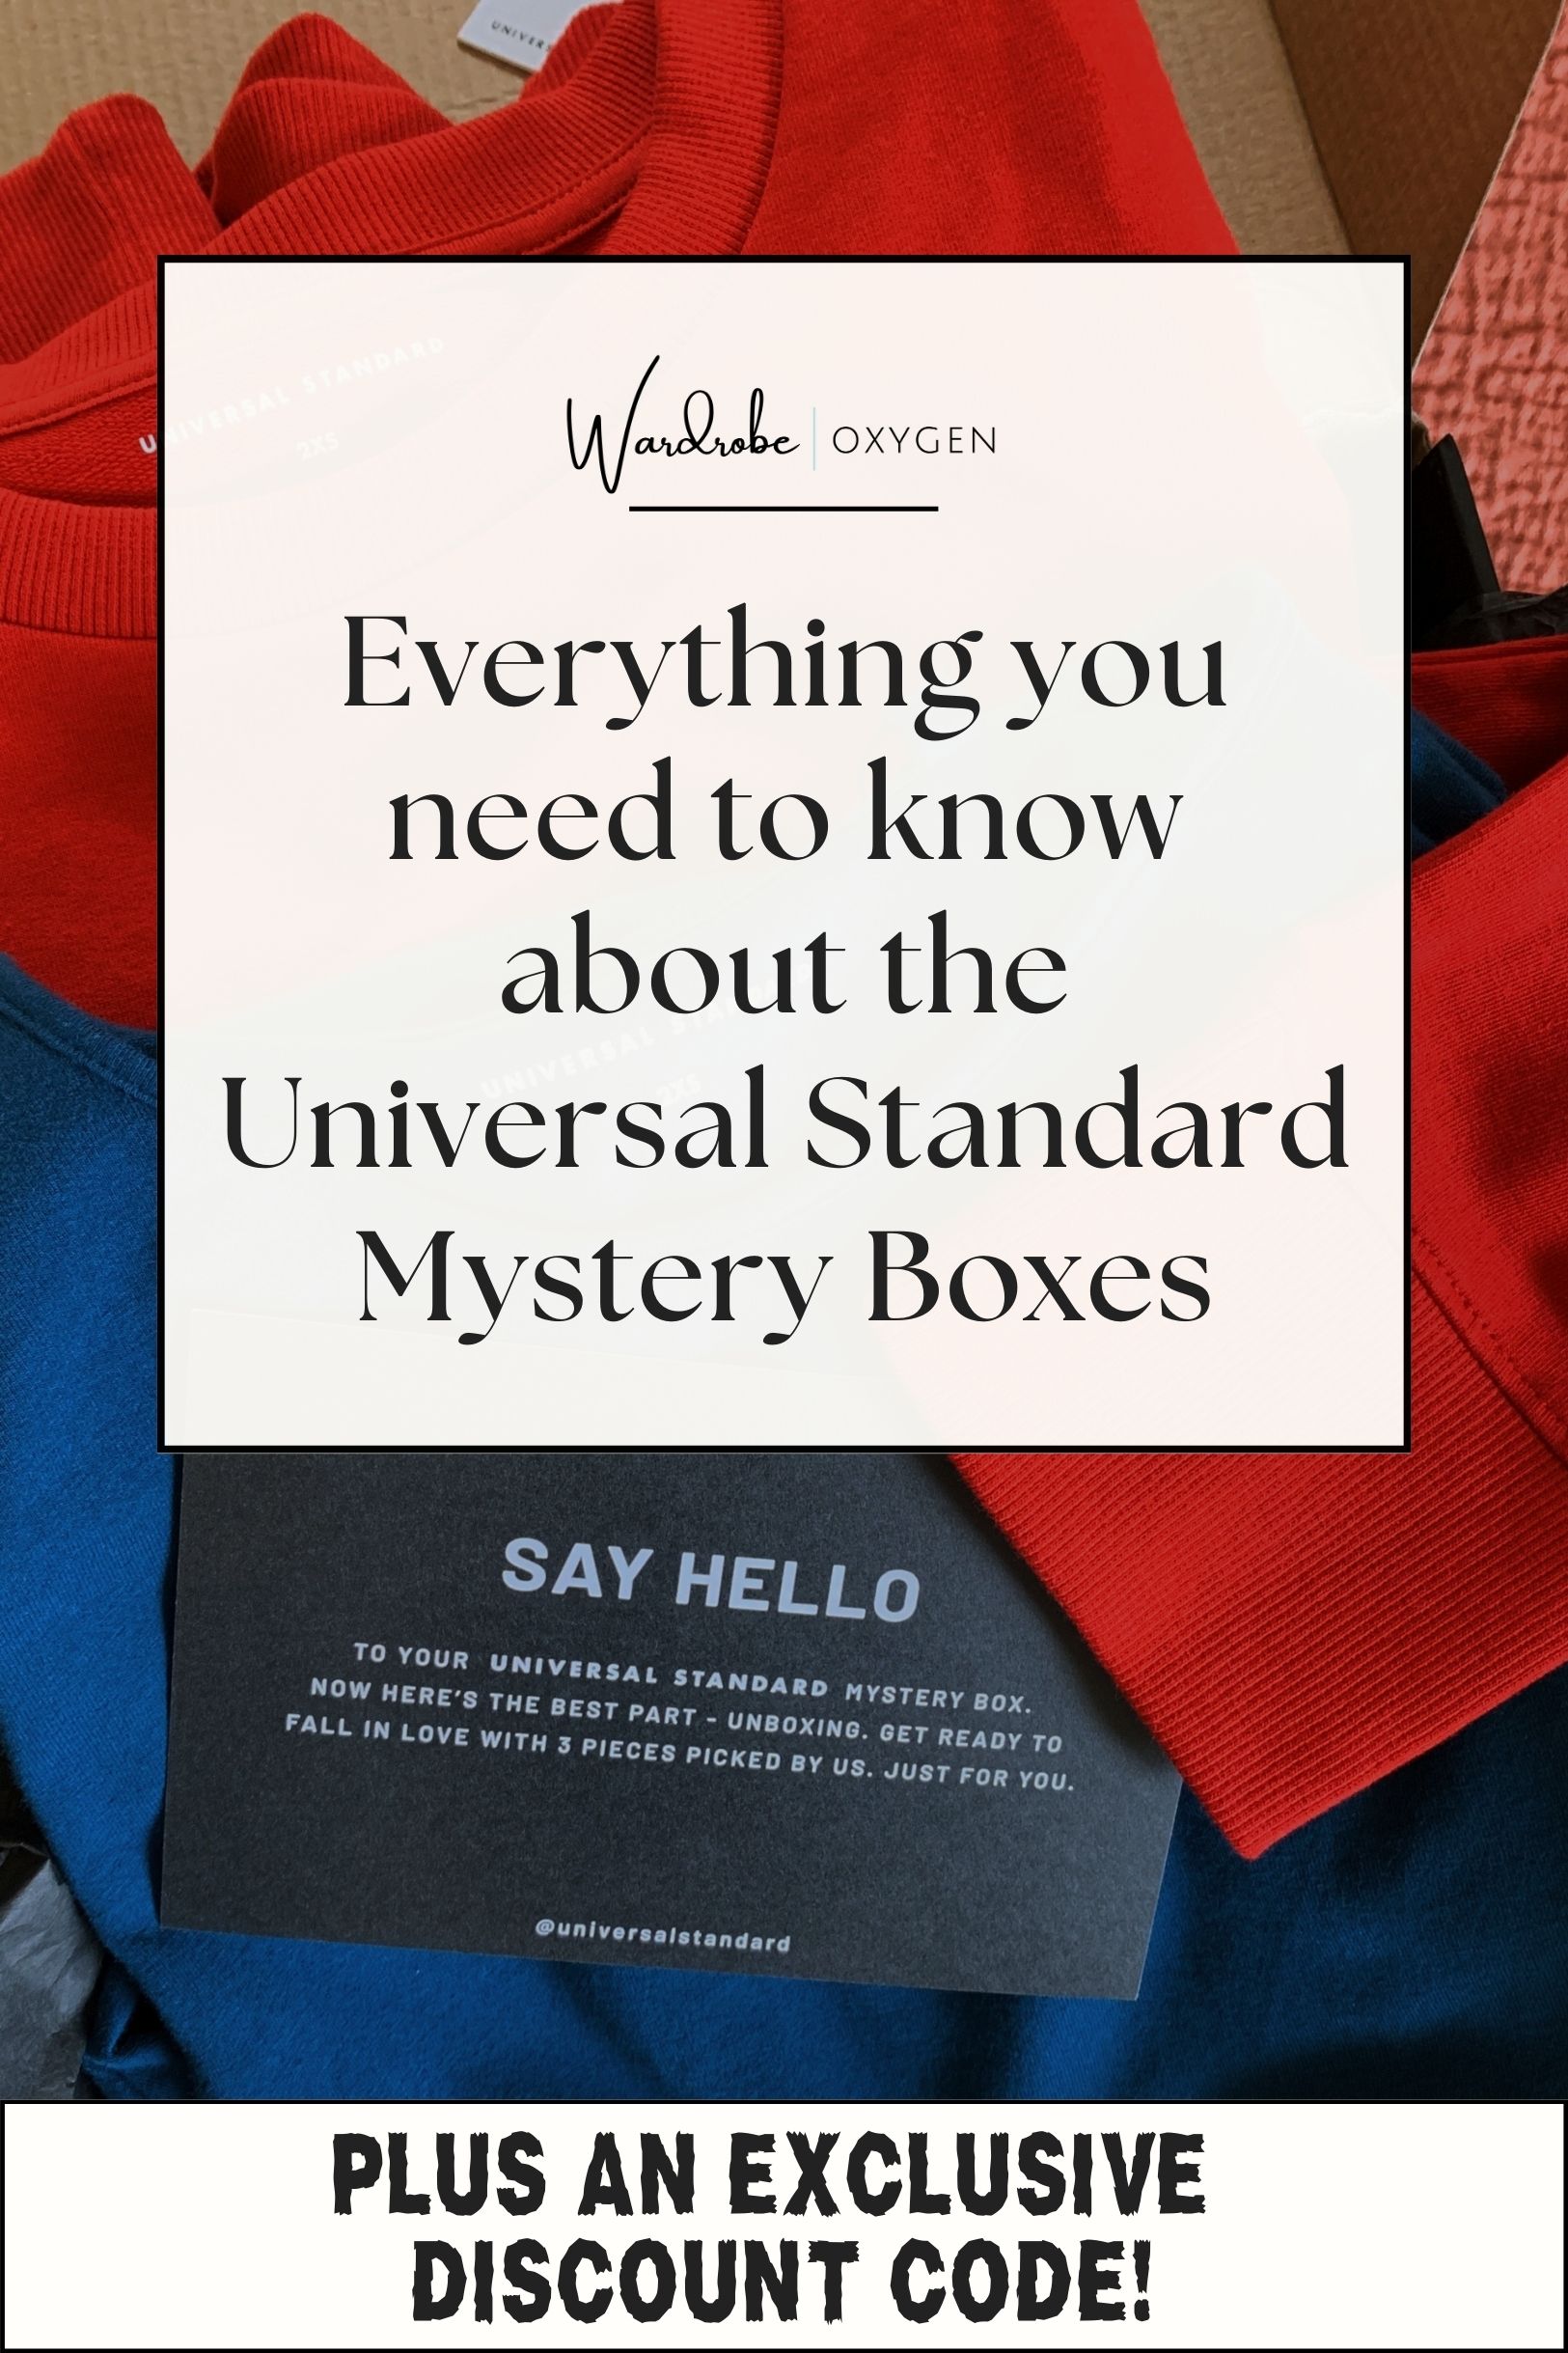 Universal Standard Mystery Box 2023: What You Need to Know